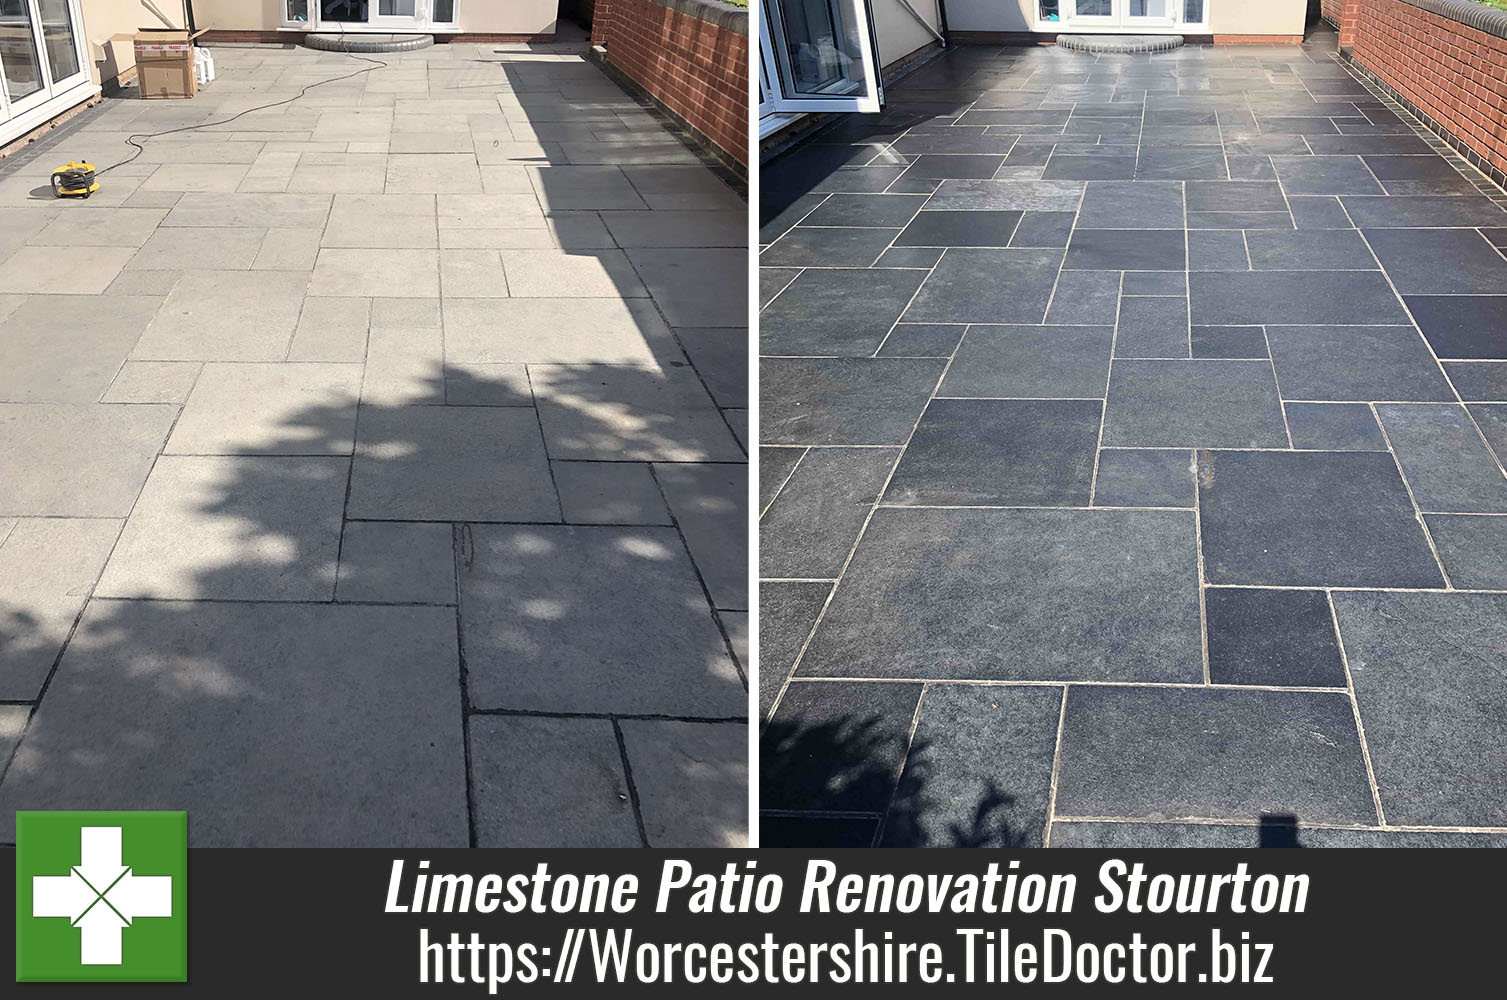 Limestone-Patio-Before-and-After-Renovation-Stourton